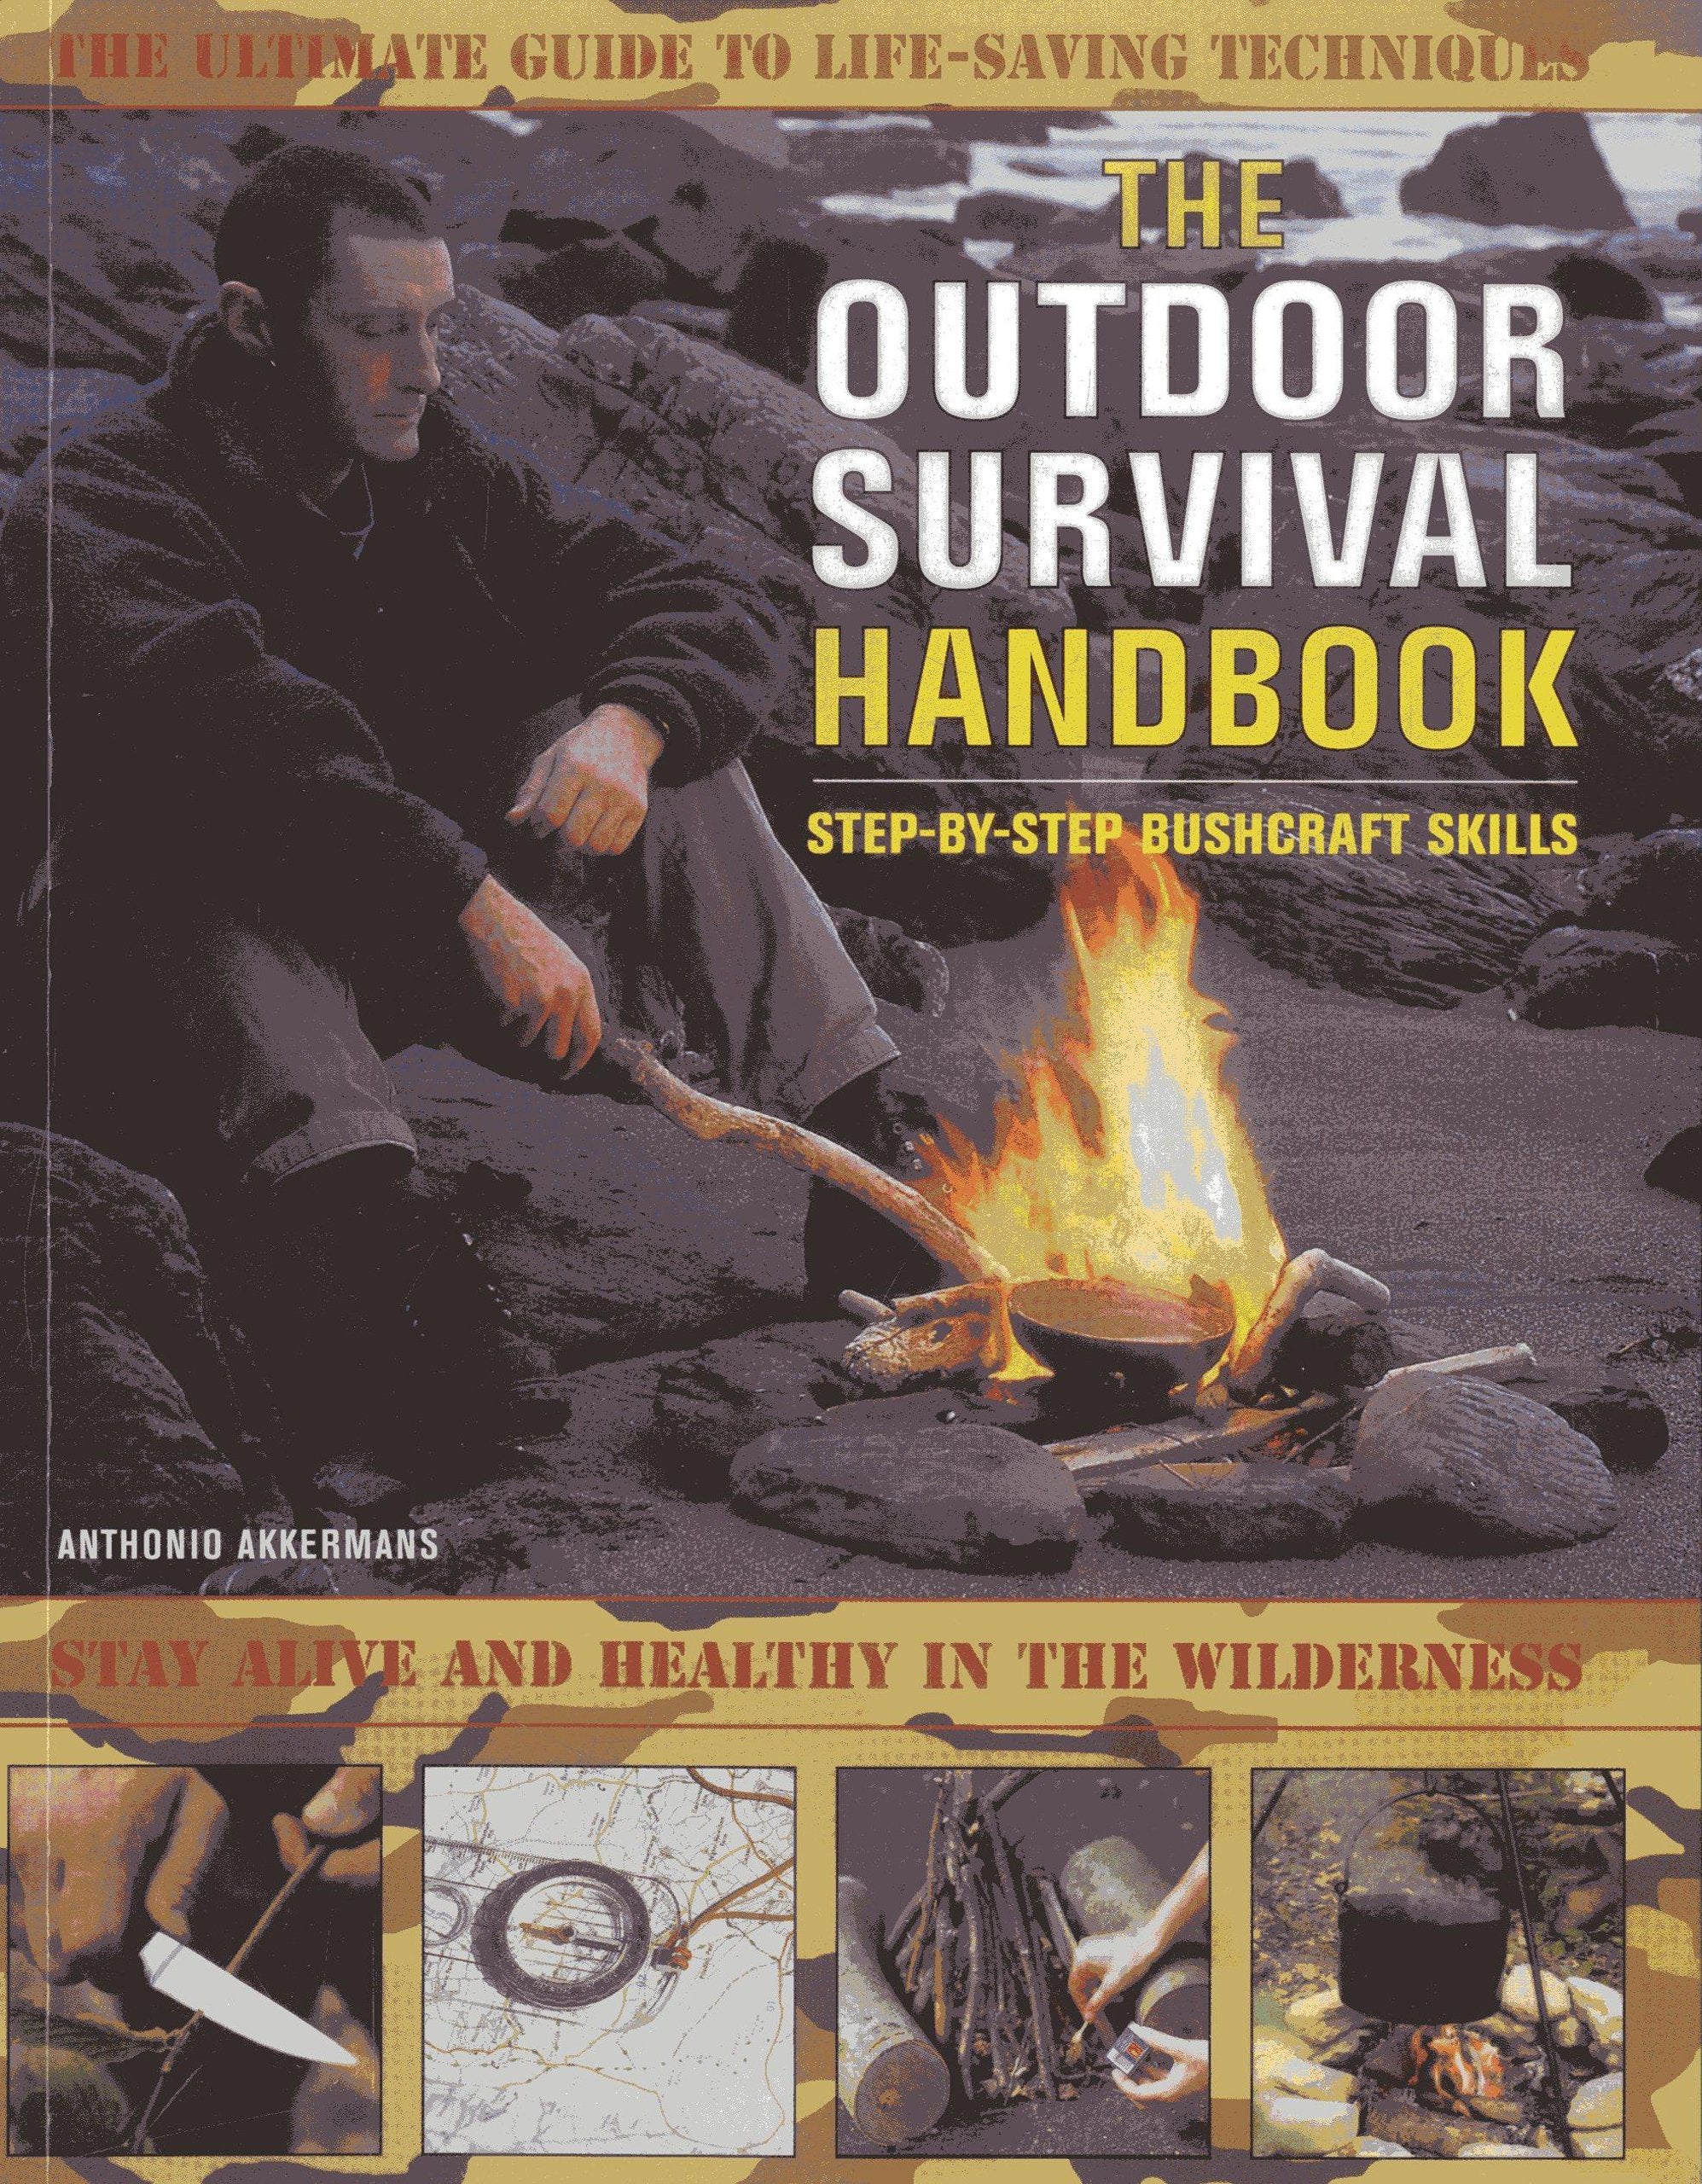 The Outdoor Survival Handbook Step-By-Step Bushcraft Skills: The ultimate guide to life-saving techniques